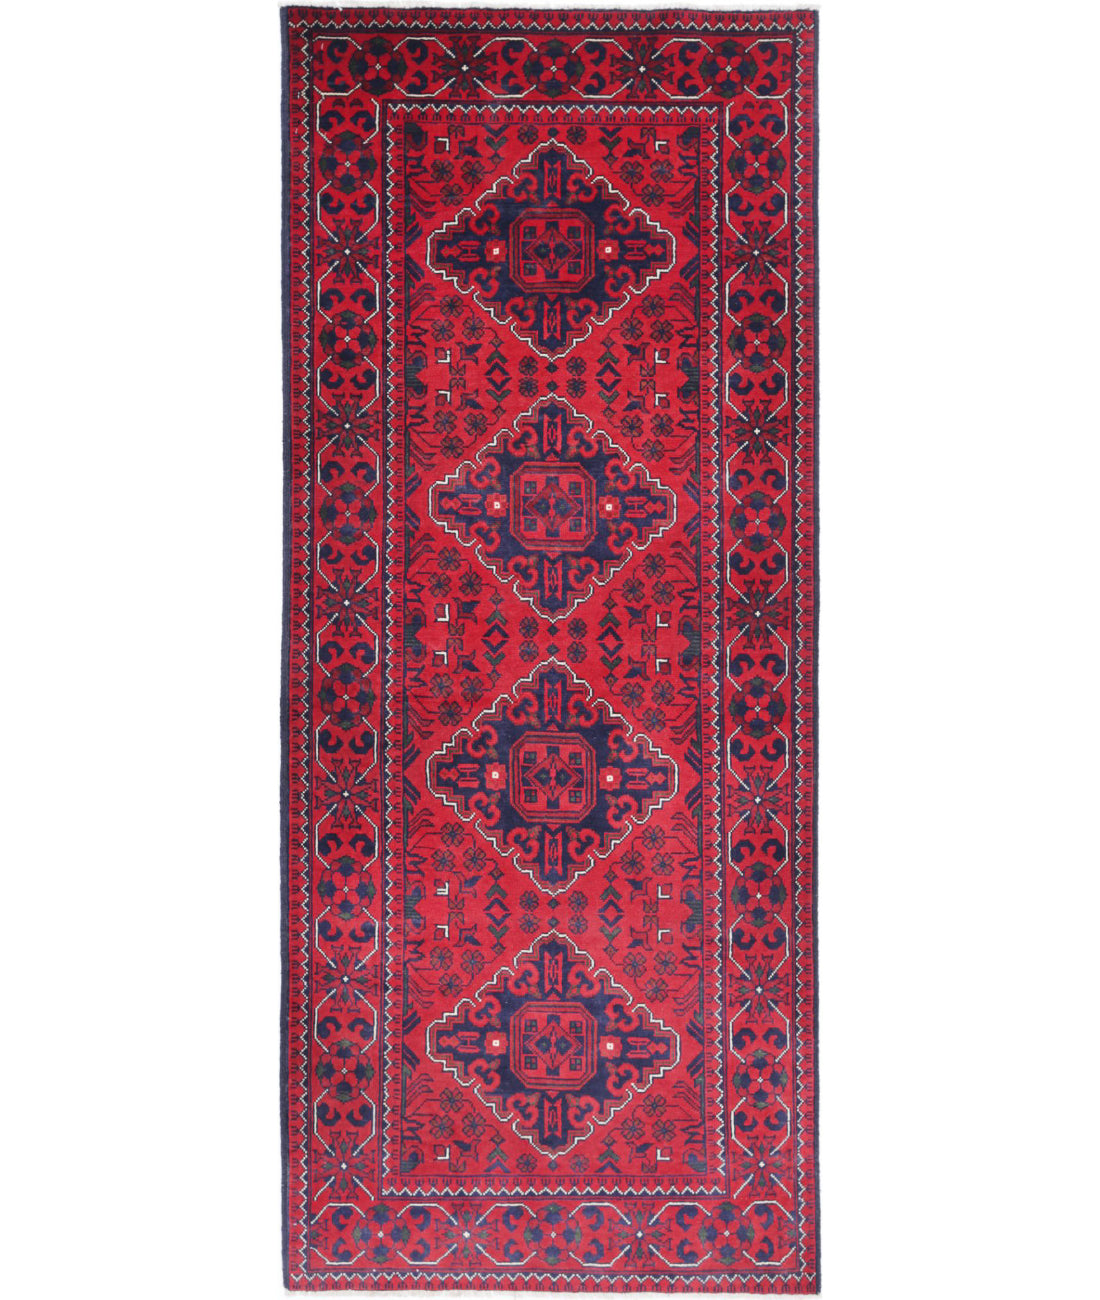 Afghan 2'8'' X 6'8'' Hand-Knotted Wool Rug 2'8'' x 6'8'' (80 X 200) / Red / Blue